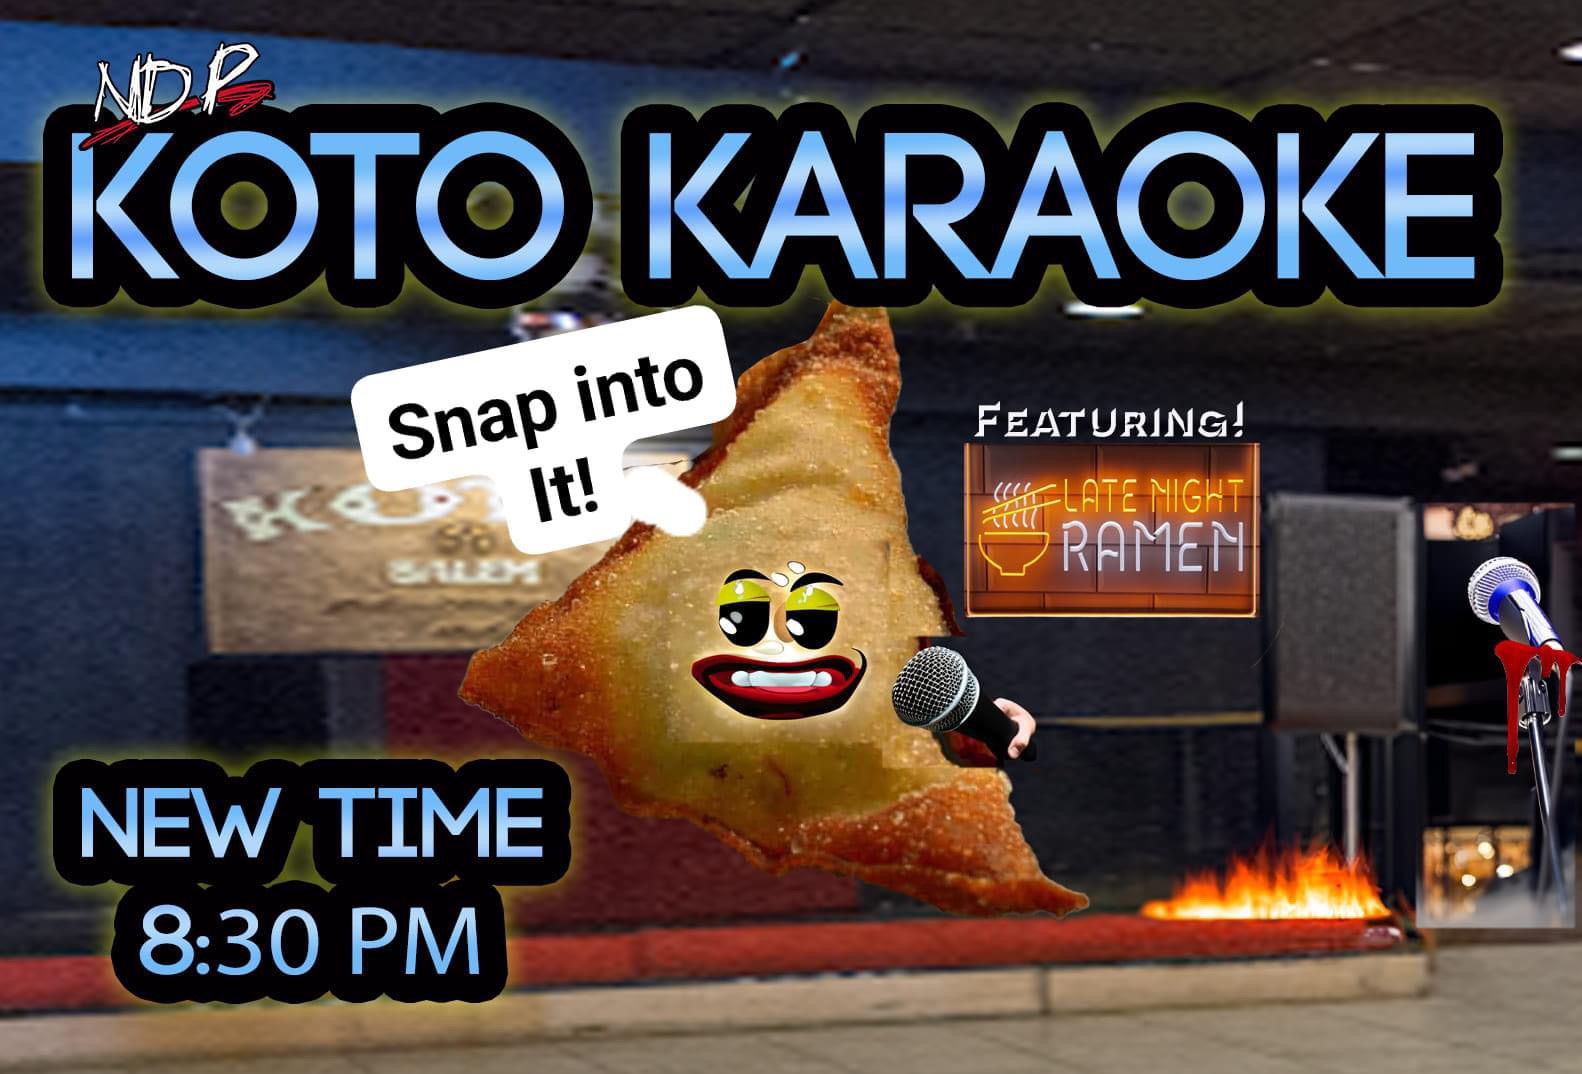 Showcase banner for a koto karaoke night showcasing a lively singing dumpling animation, along with event specifics and related images such as a microphone and ramen.